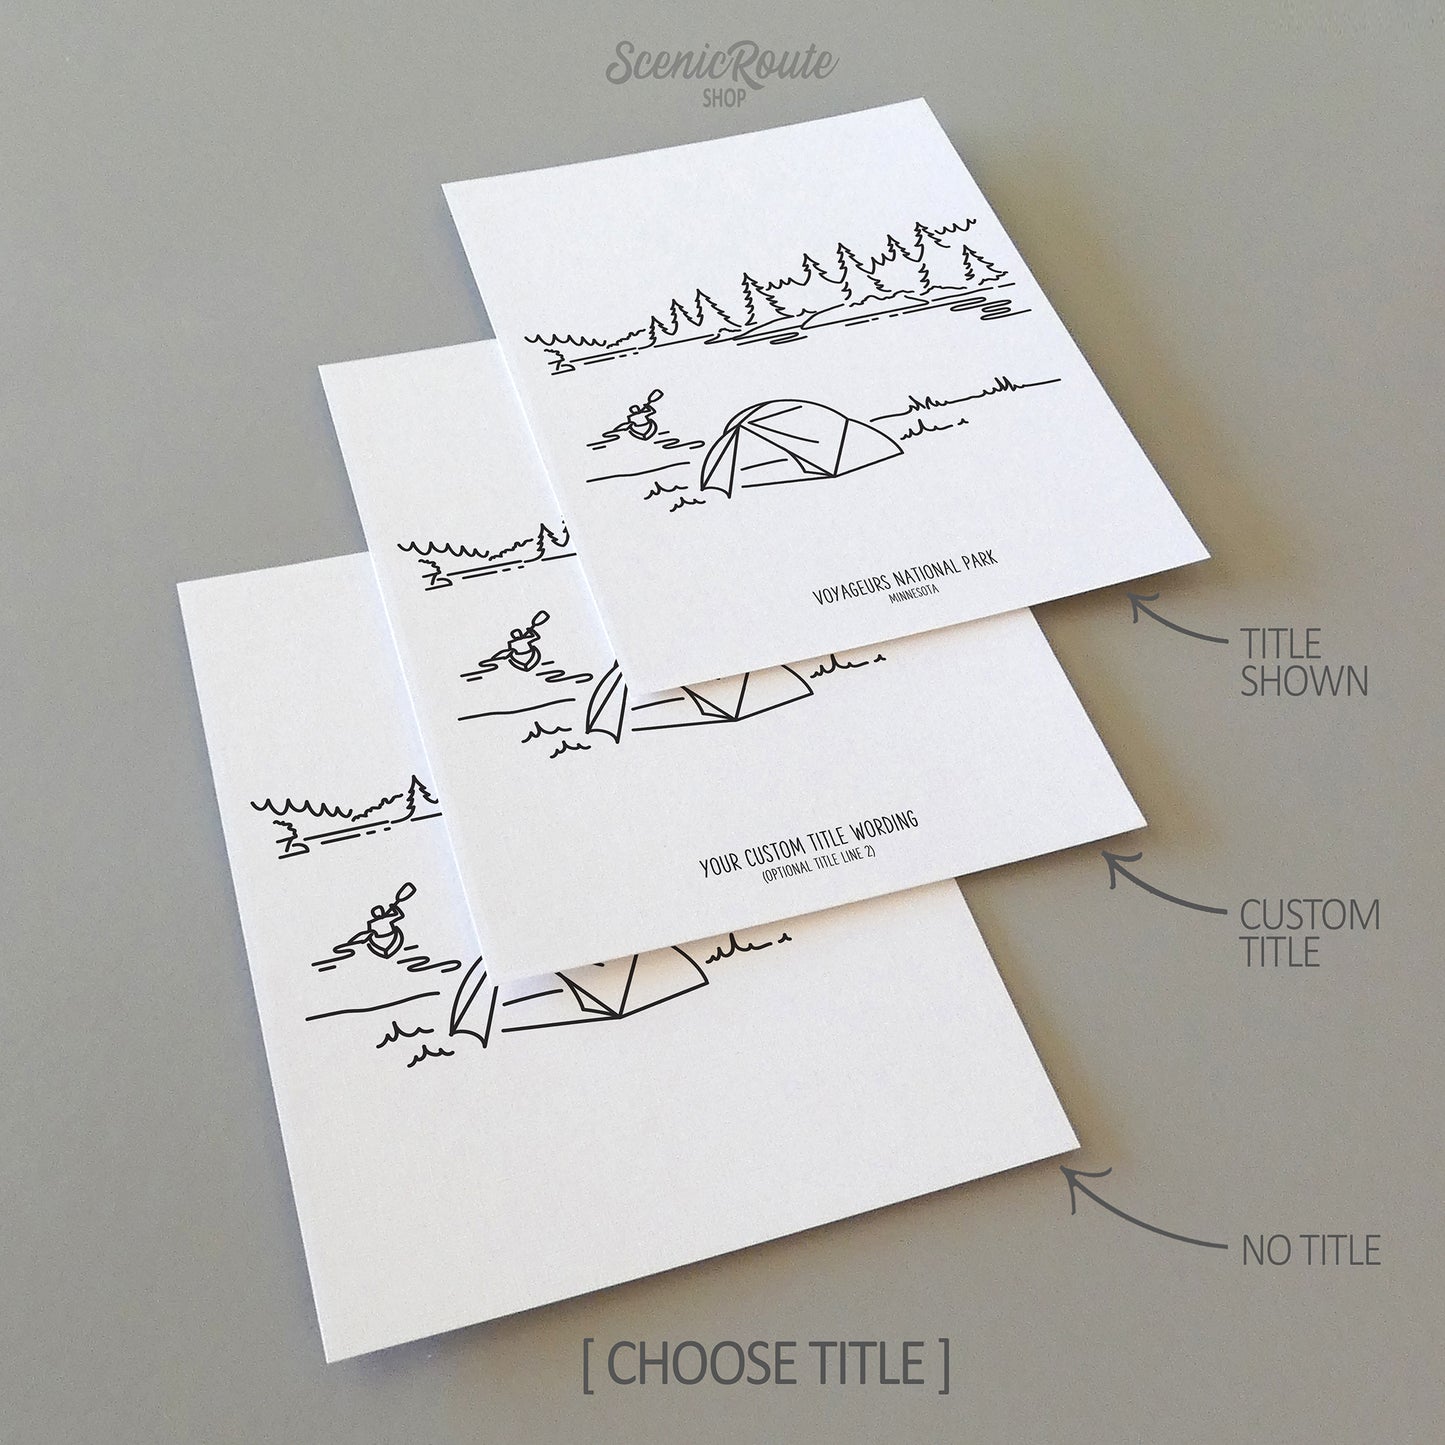 Three line art drawings of Voyageurs National Park on white linen paper with a gray background. The pieces are shown with title options that can be chosen and personalized.